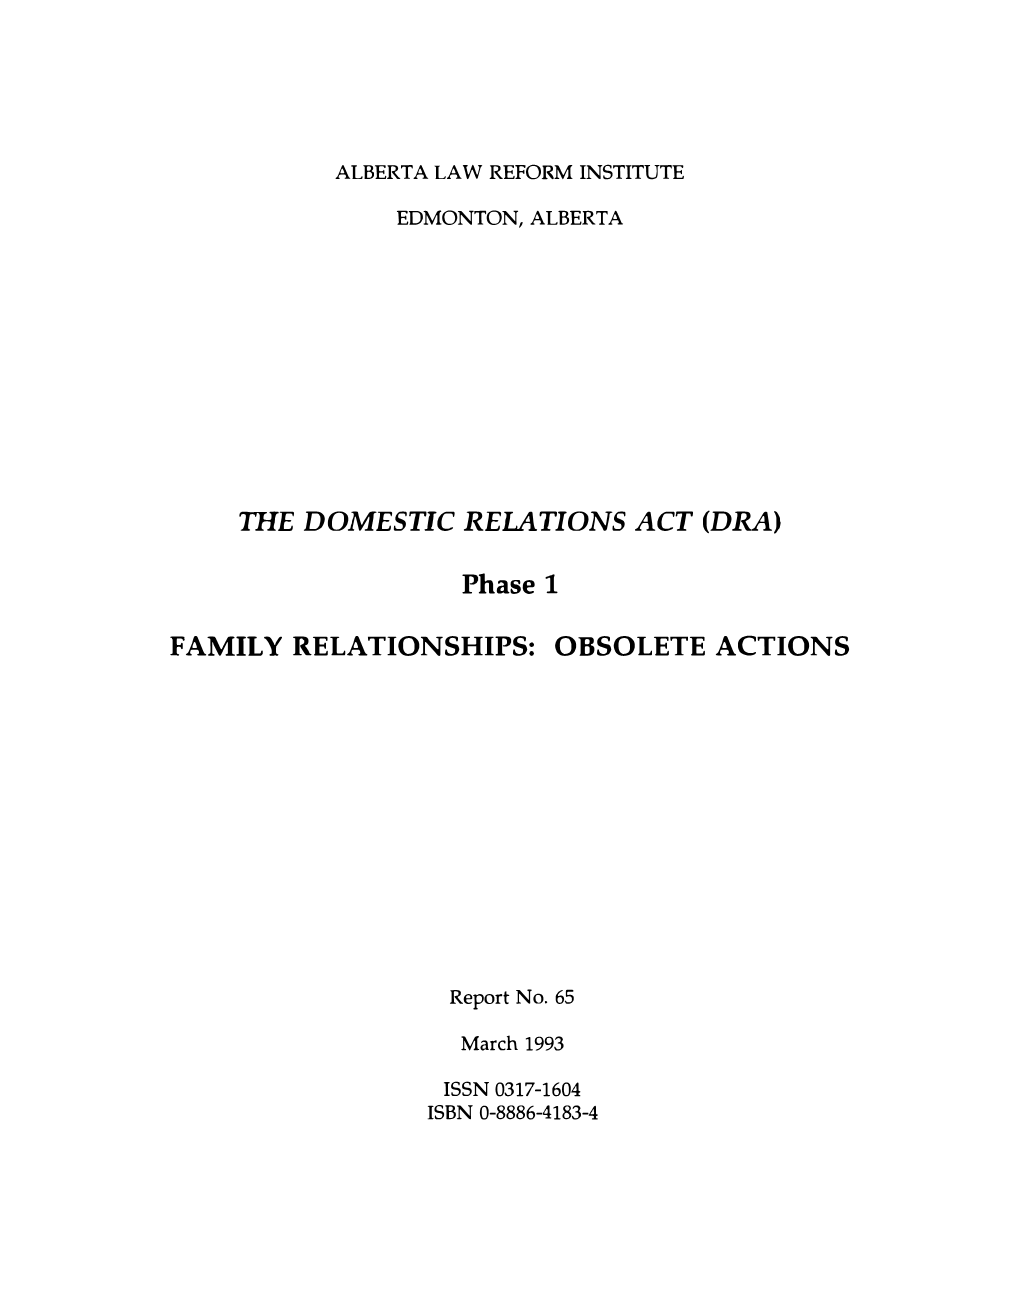 THE DOMESTIC RELATIONS ACT (DRA) Phase 1 FAMILY RELATIONSHIPS: OBSOLETE ACTIONS